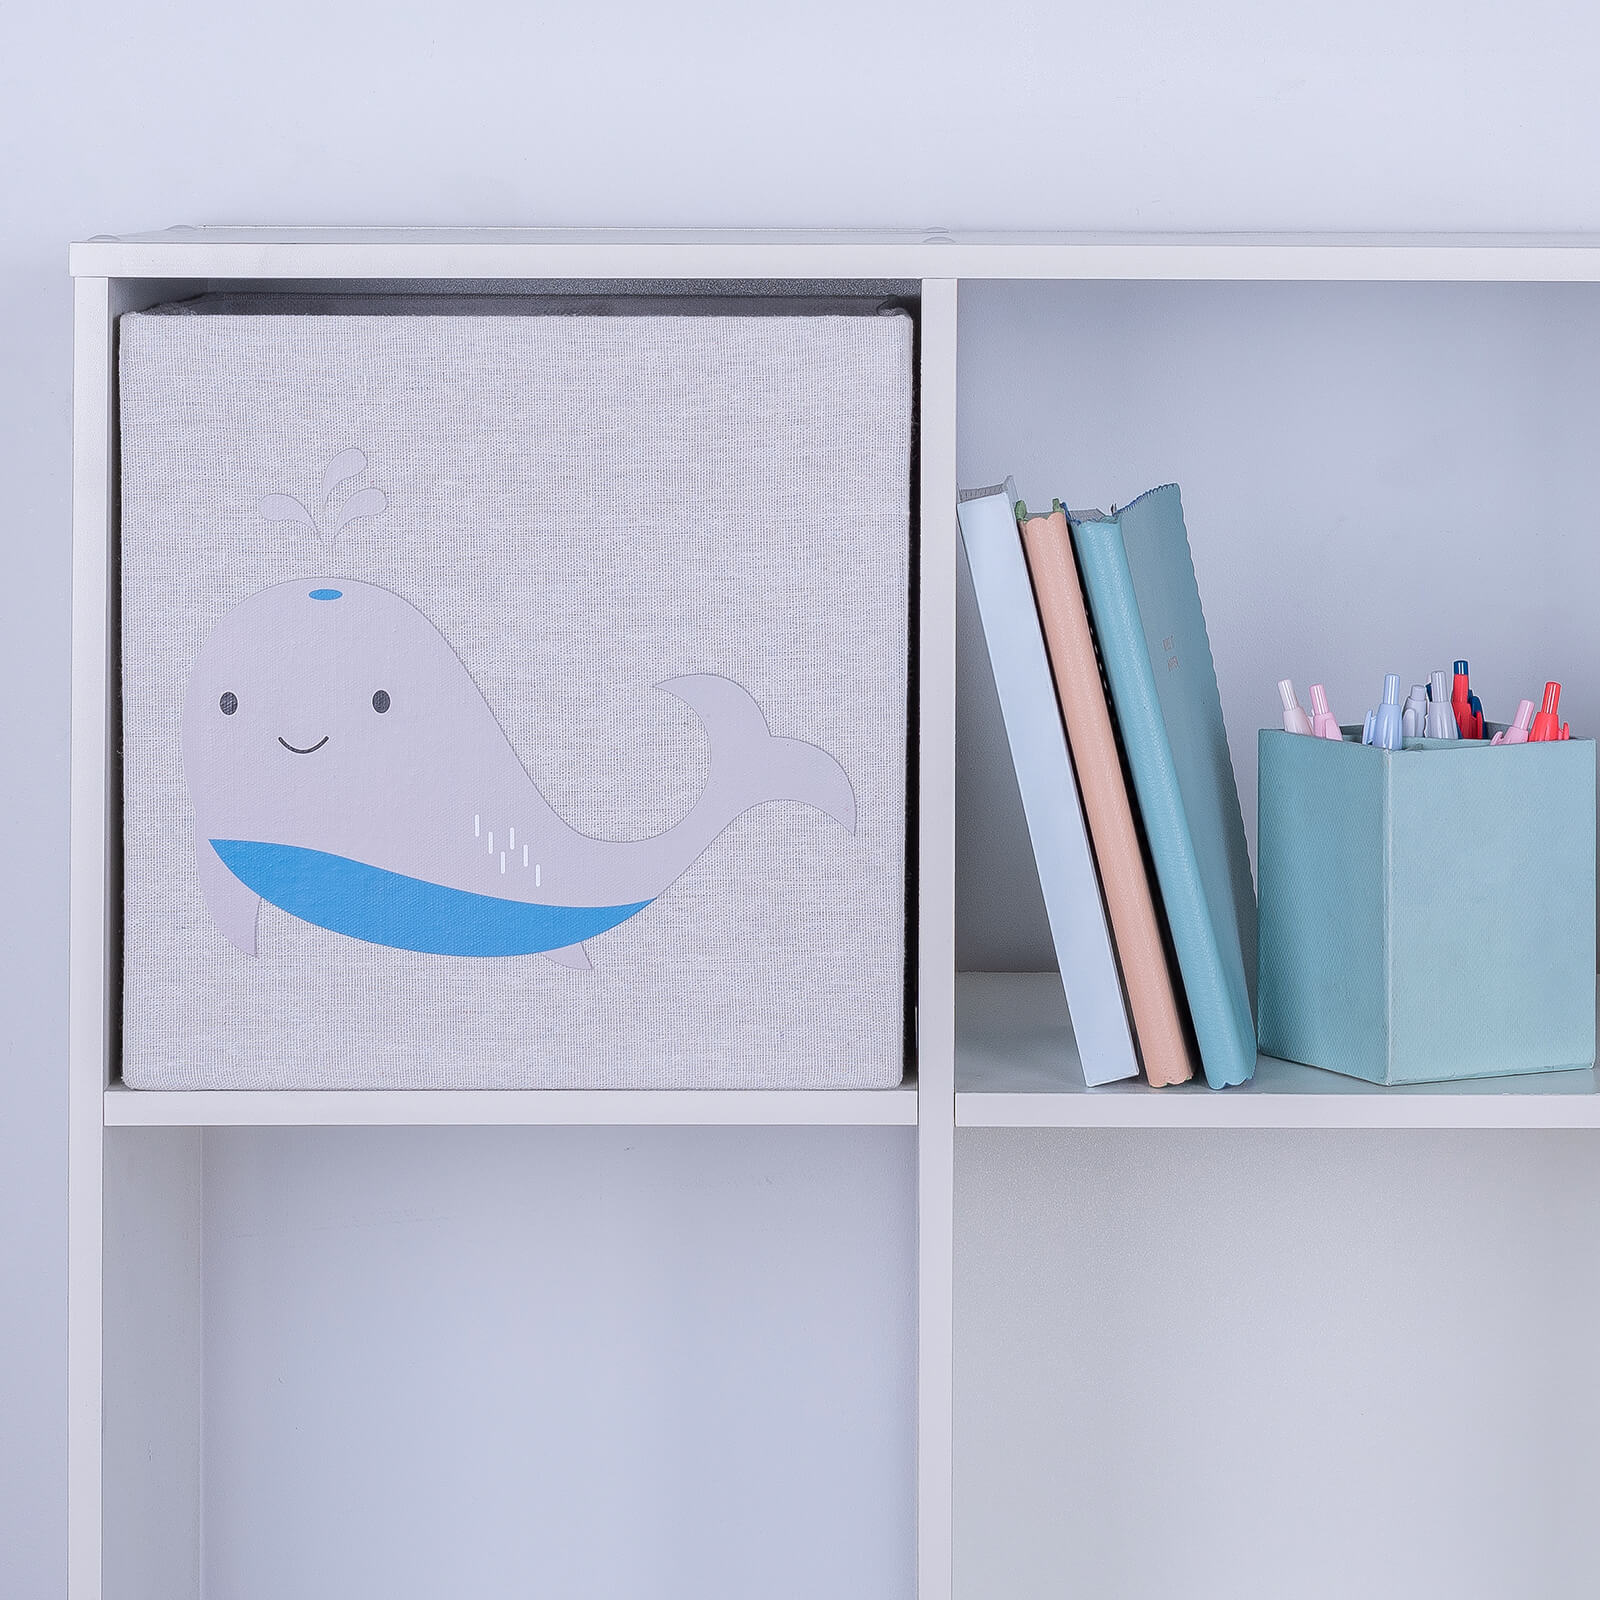 Kids' Compact Cube Fabric Insert - Whale